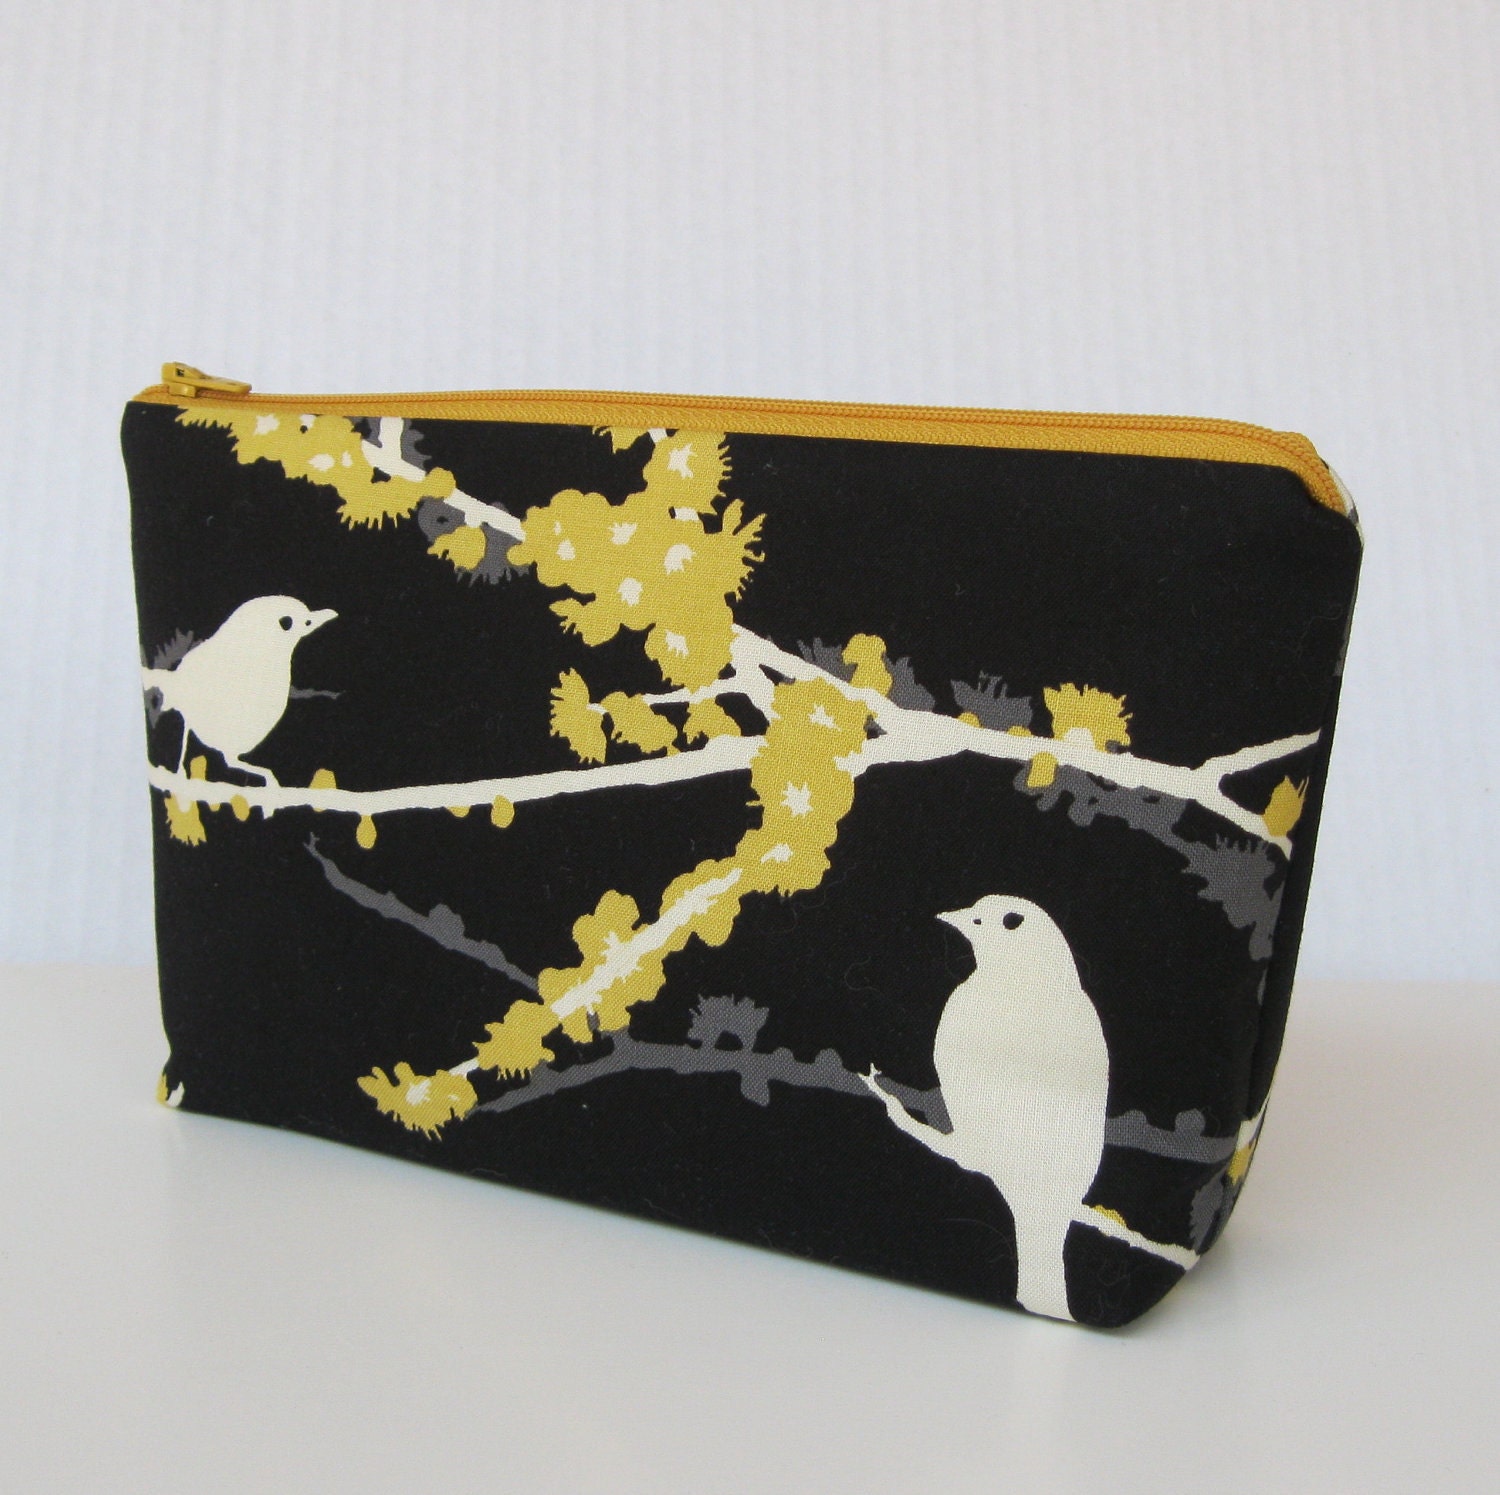 Fabric Zippered Pouch Clutch Bag - Sparrows in Cavern - Aviary Collection - READY TO SHIP